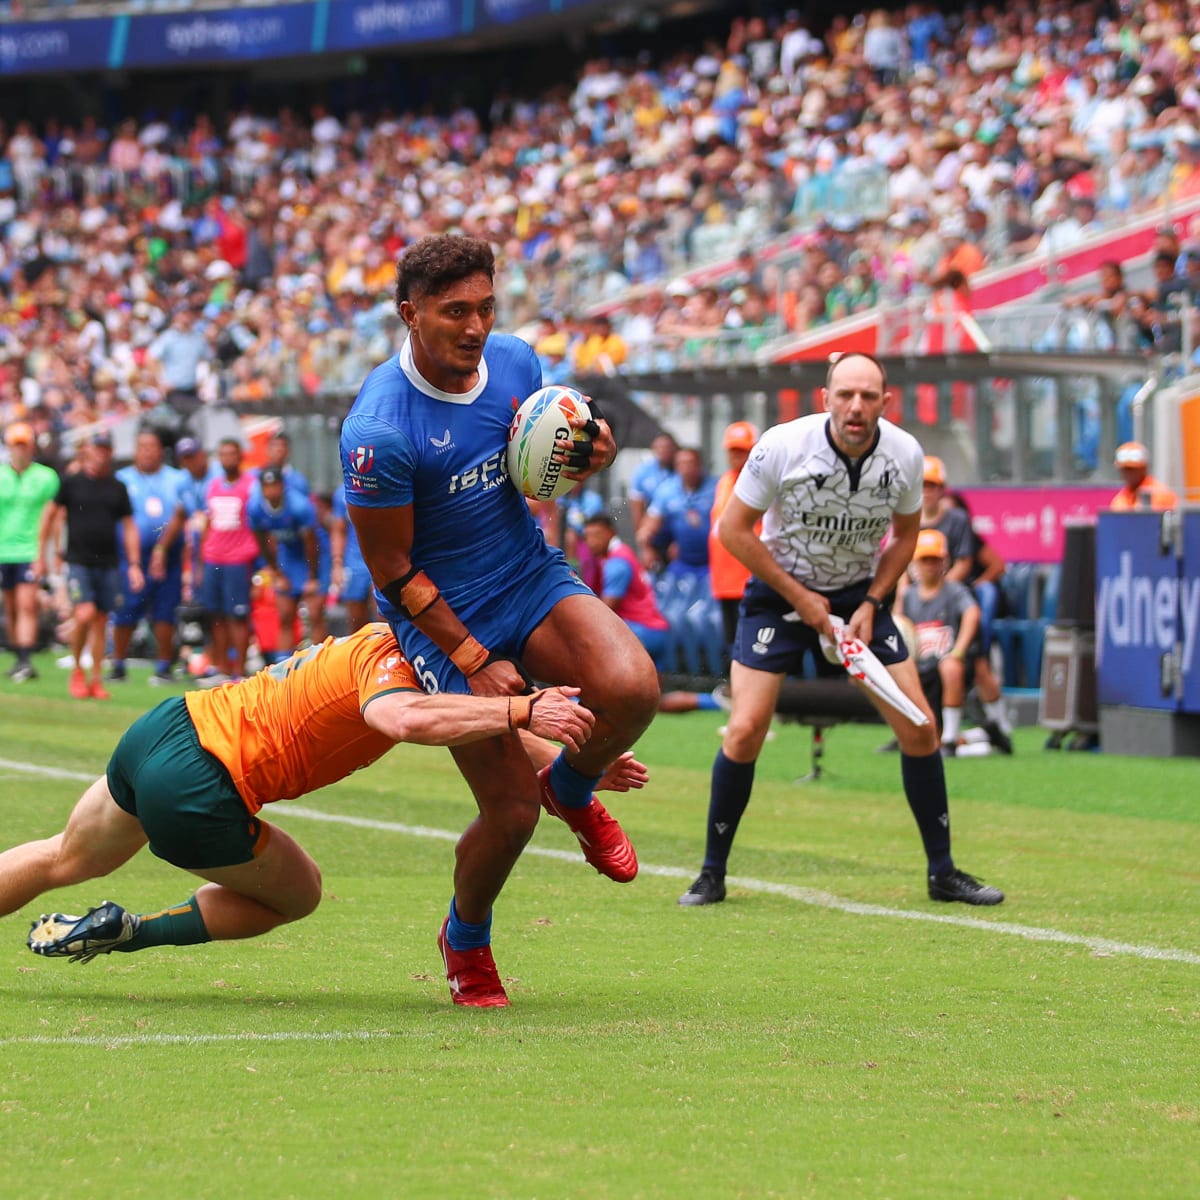 Los Angeles World Rugby Sevens Free Live Stream Online - How to Watch and Stream Major League and College Sports